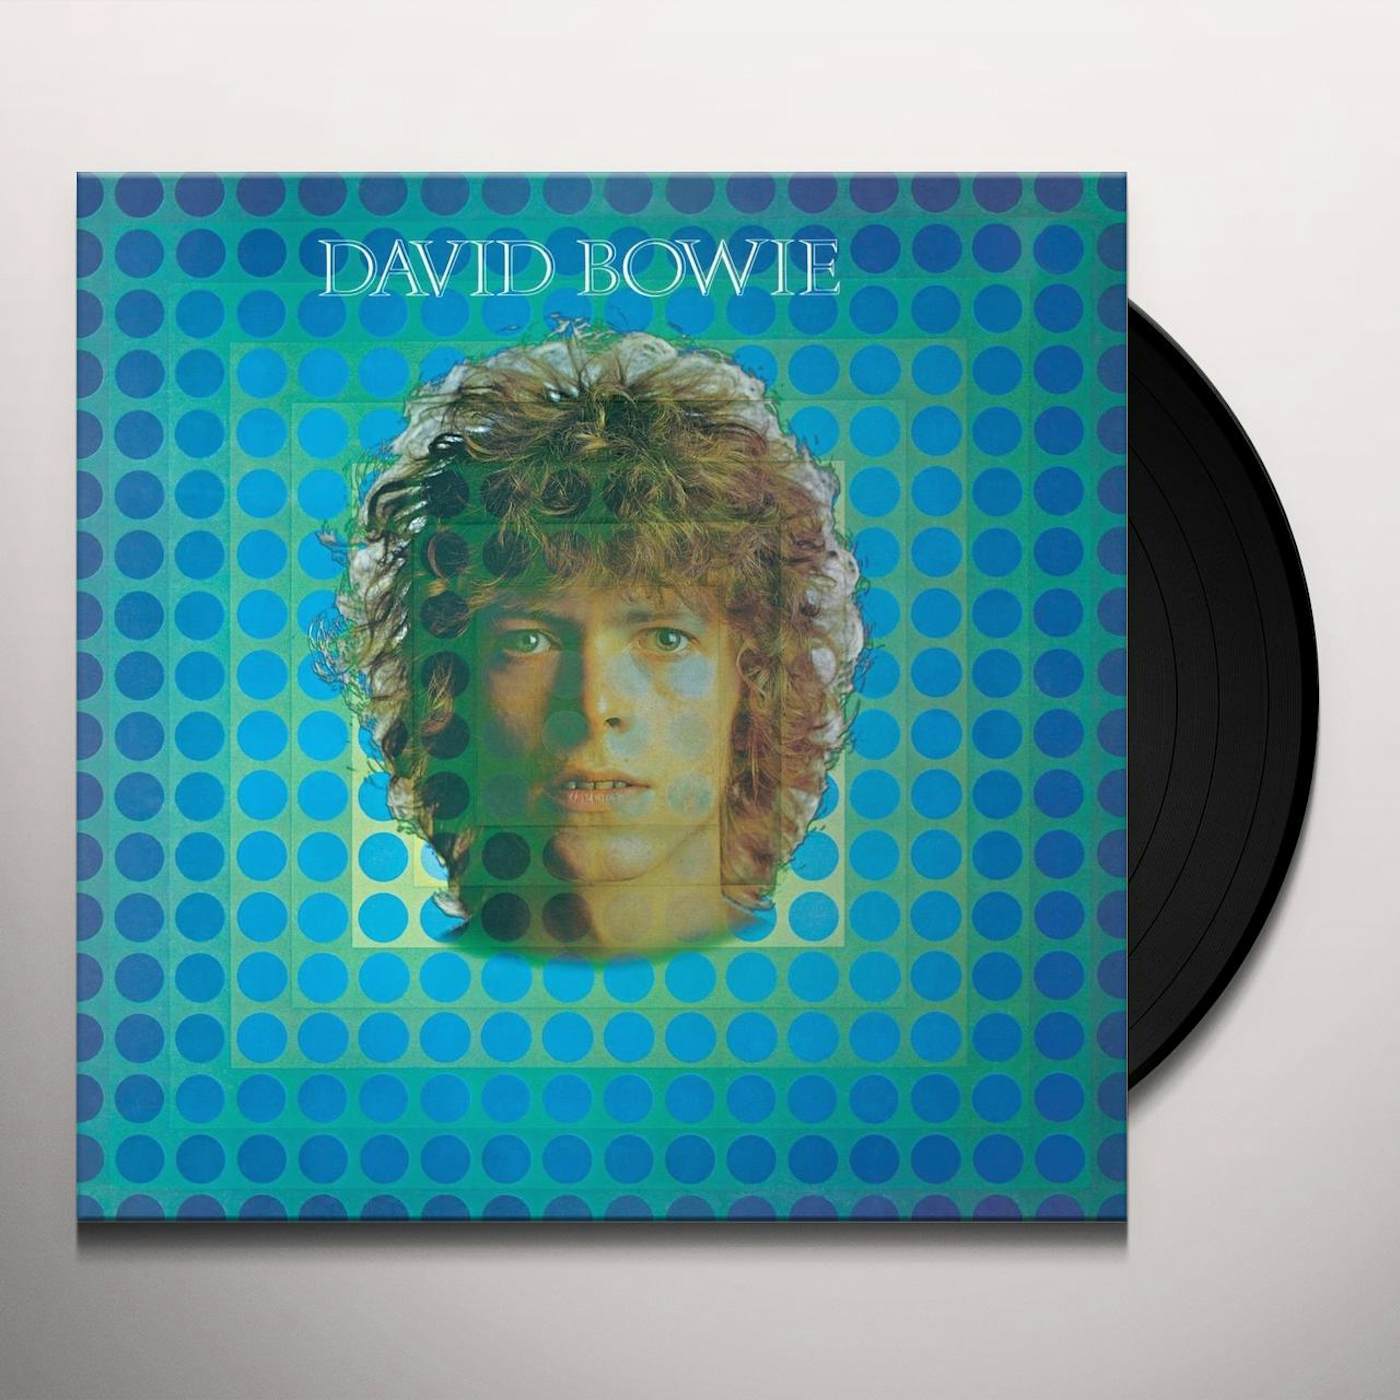 David Bowie SPACE ODDITY: 40TH ANNIVERSARY Vinyl Record - Remastered, Special Edition